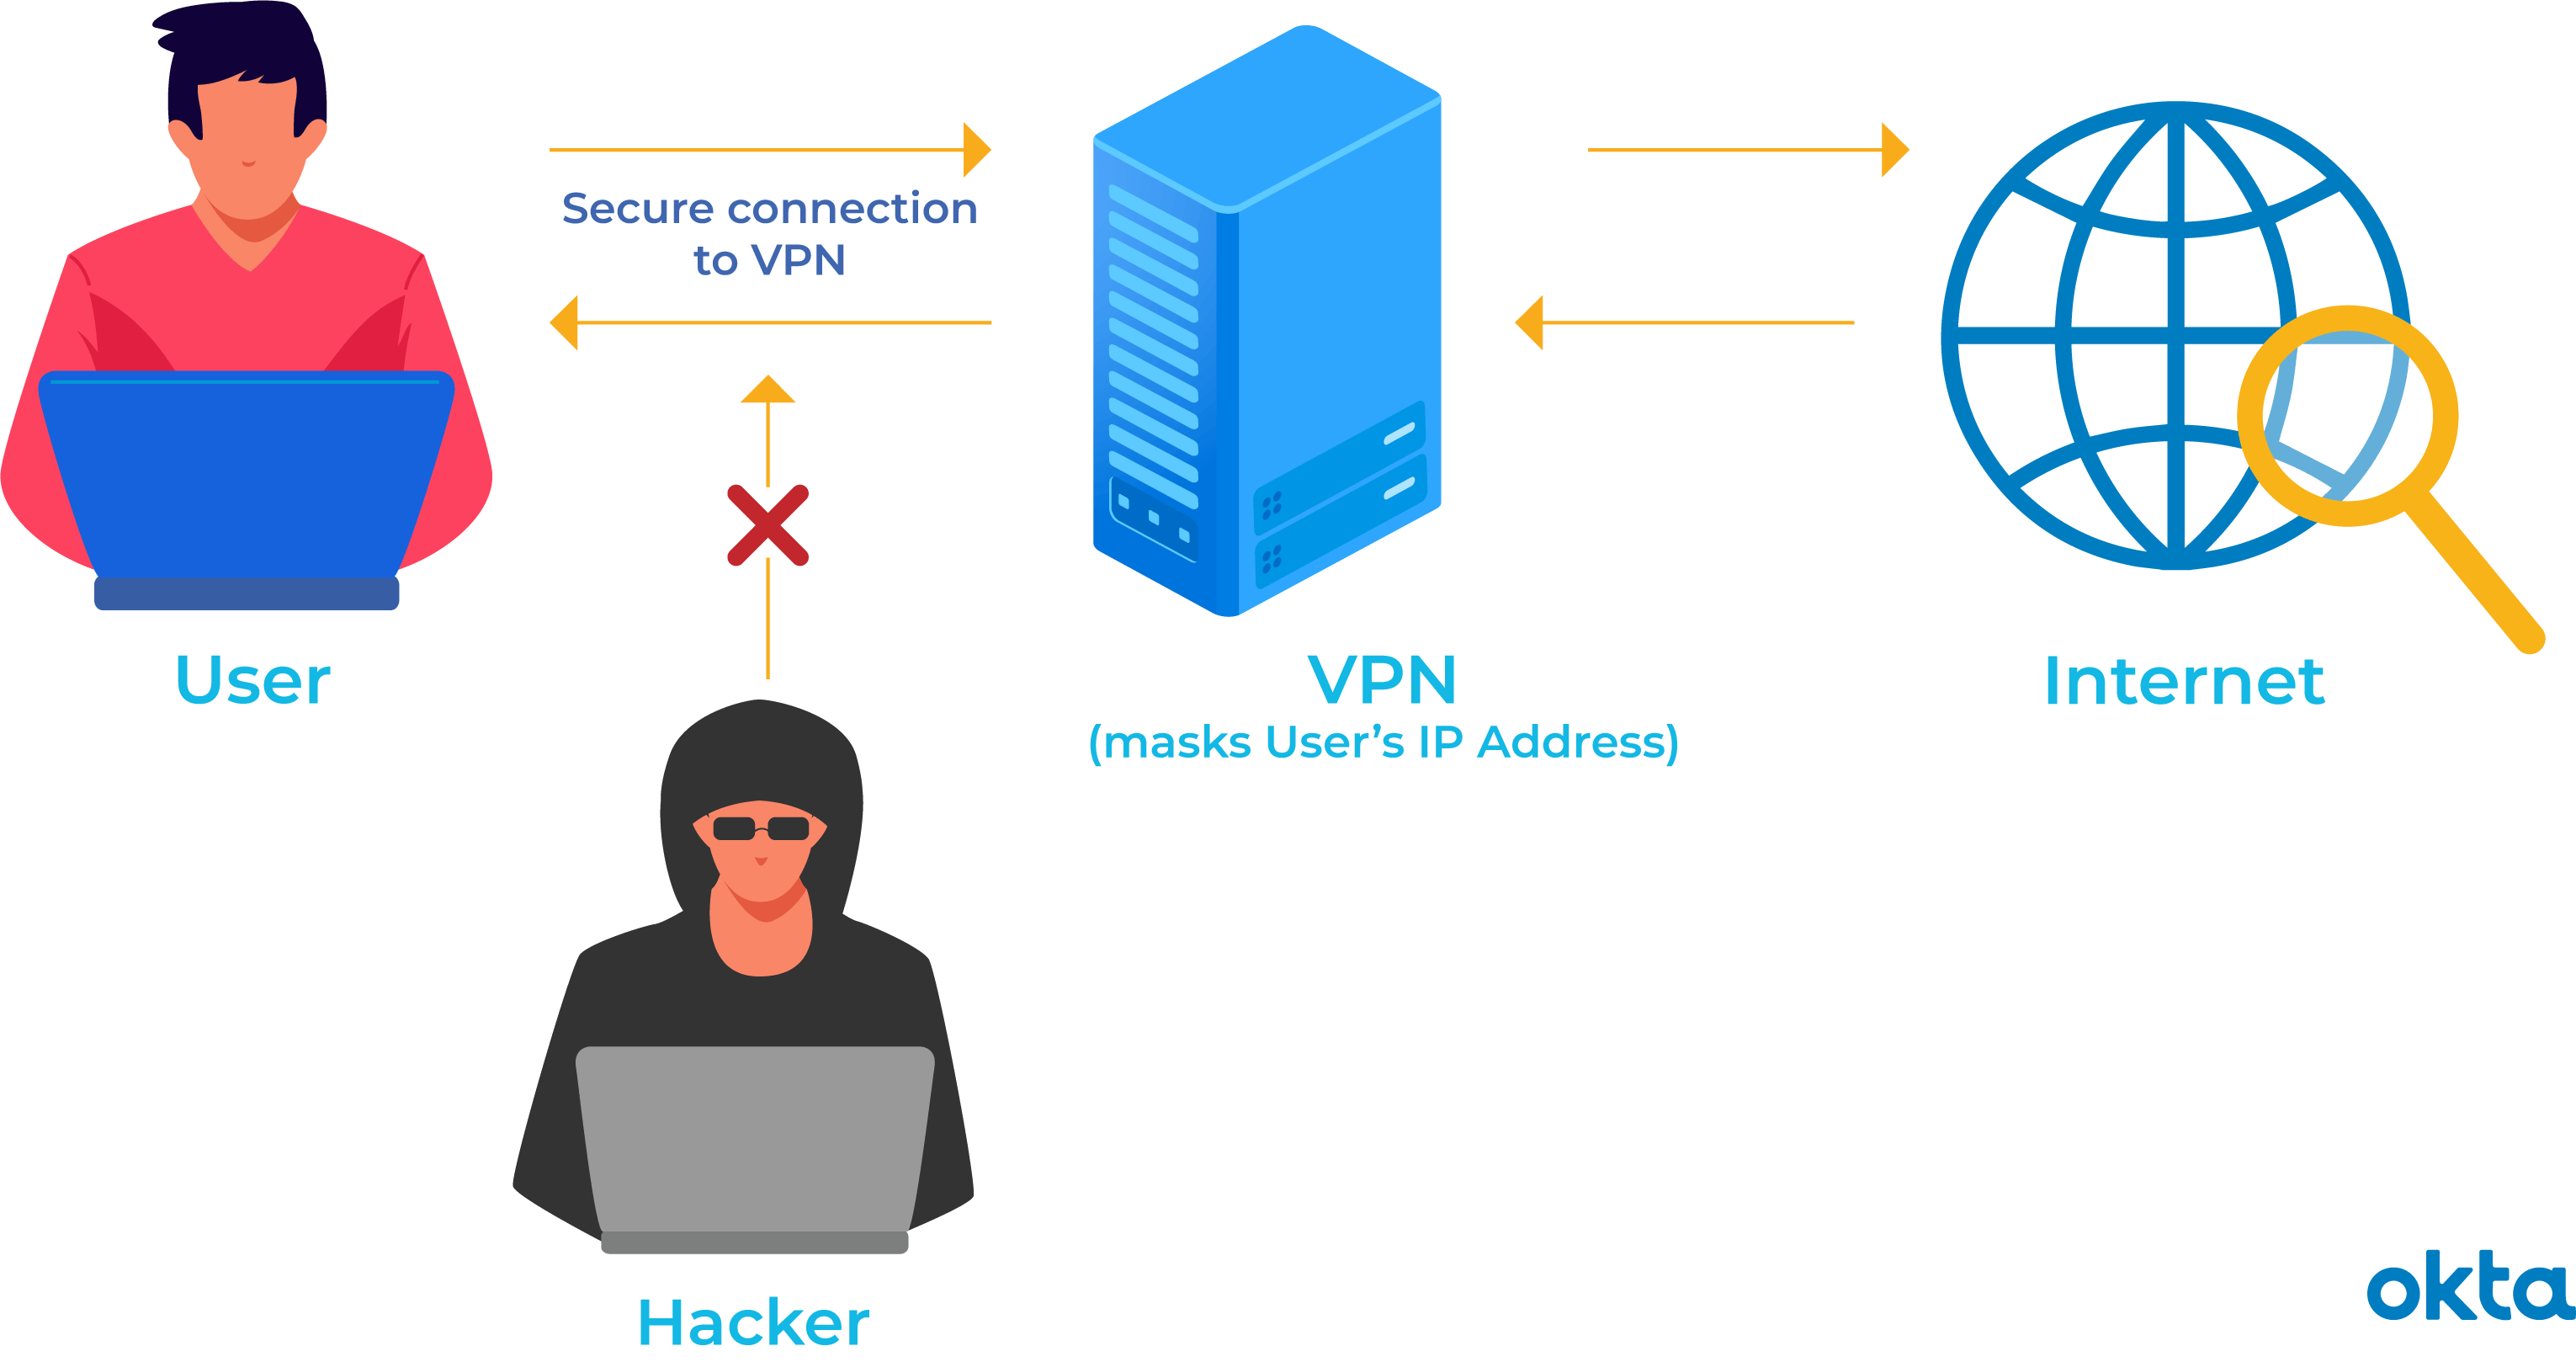 What is a Virtual Private Network (VPN), and how does it work?